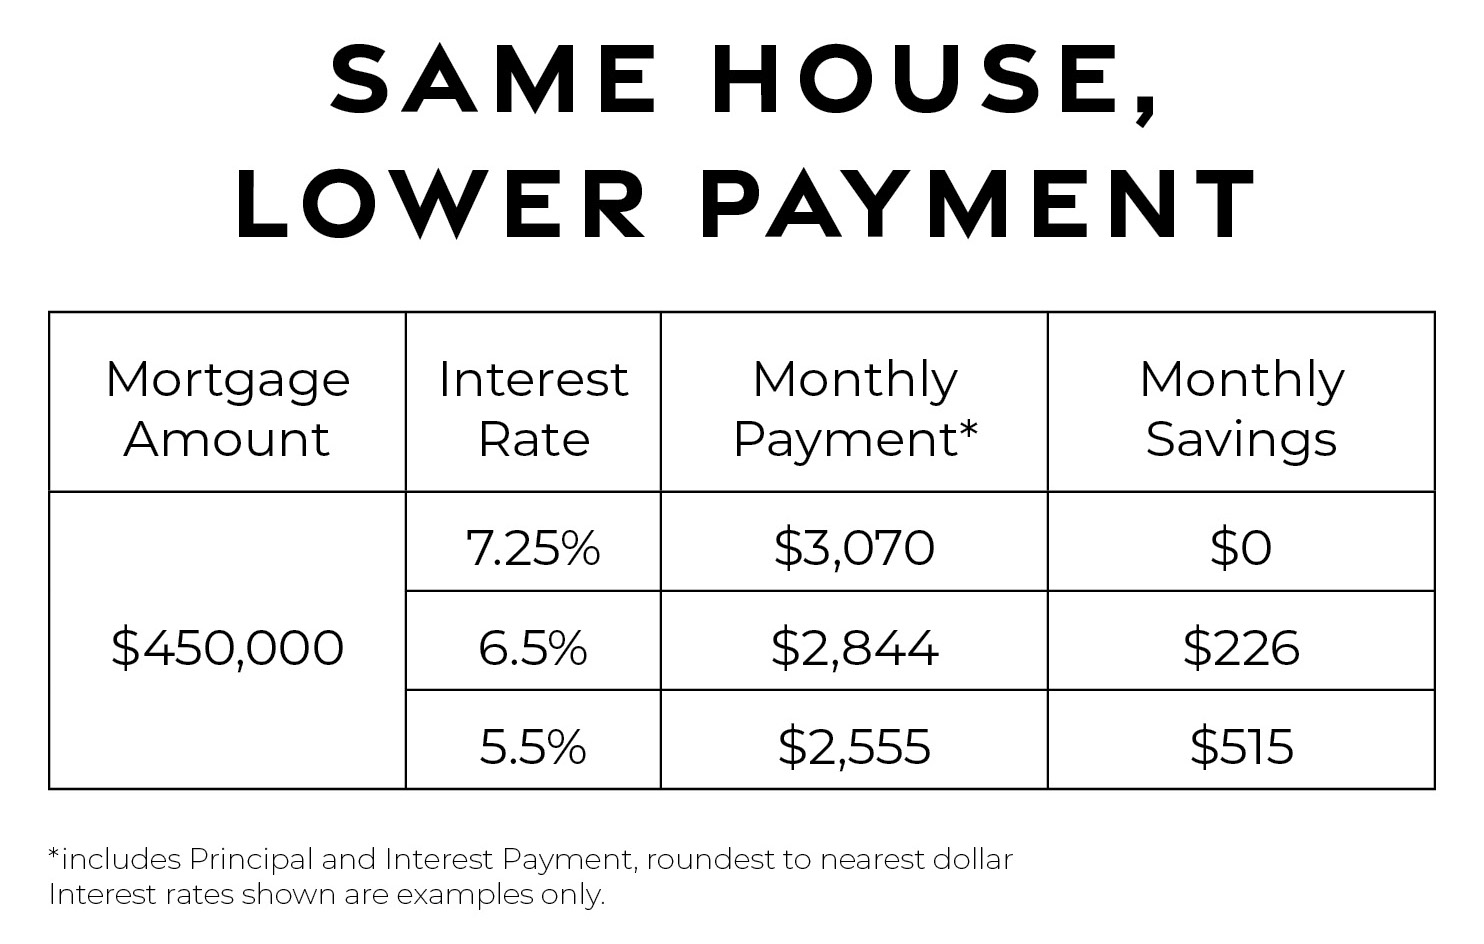 Same House, Lower Payment